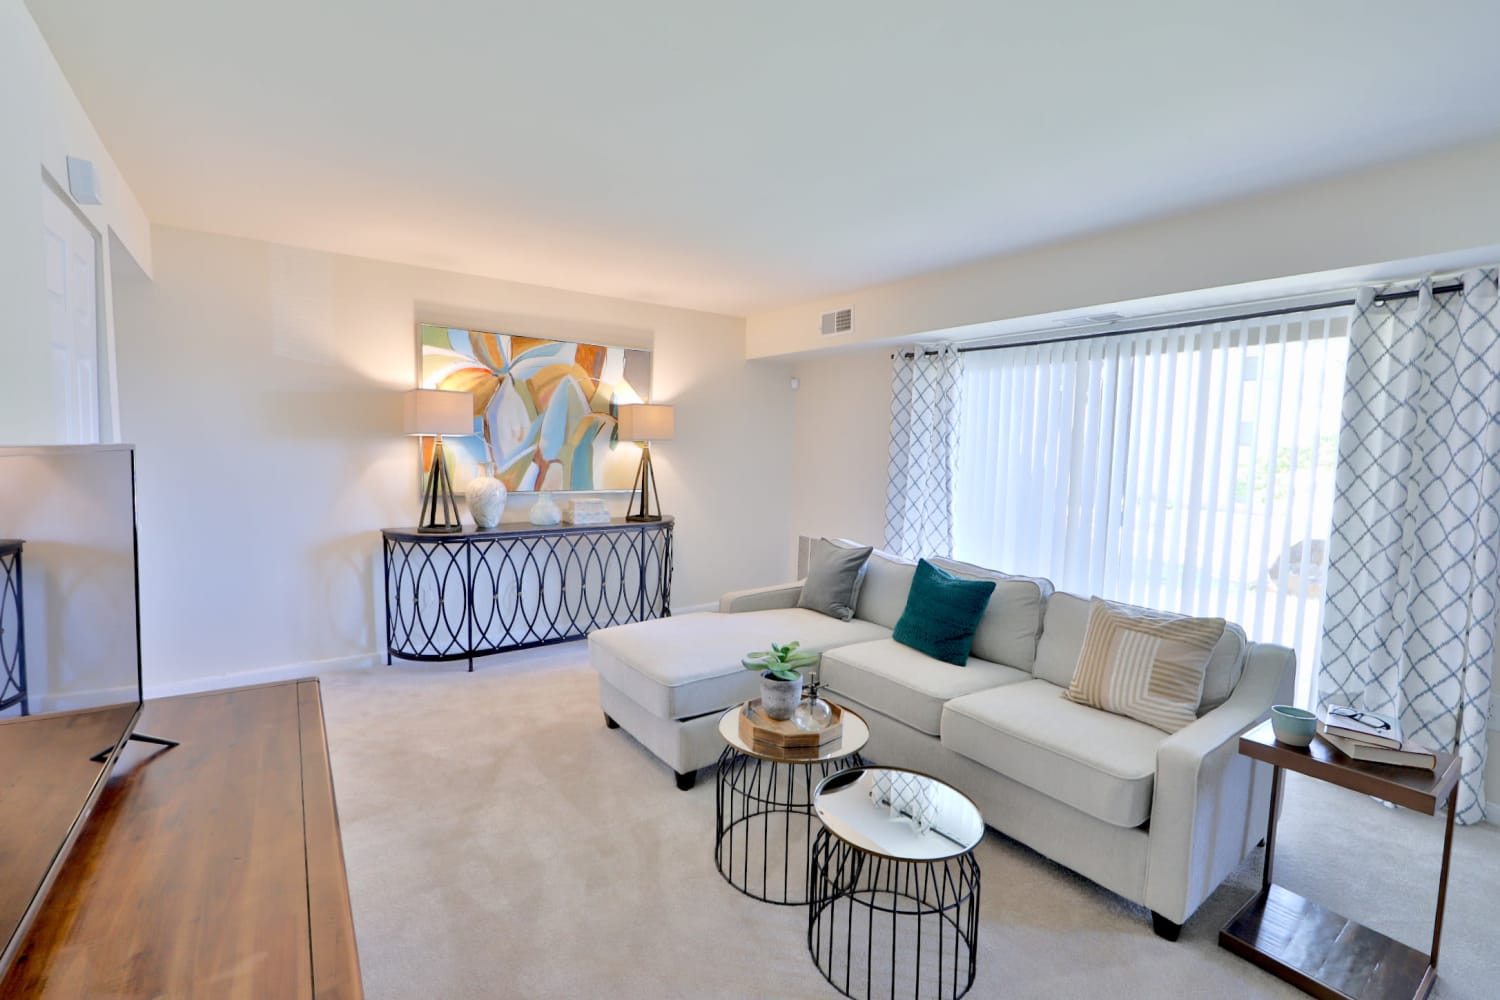 Spacious living room of a model home at Gwynn Oaks Landing Apartments & Townhomes in Baltimore, Maryland